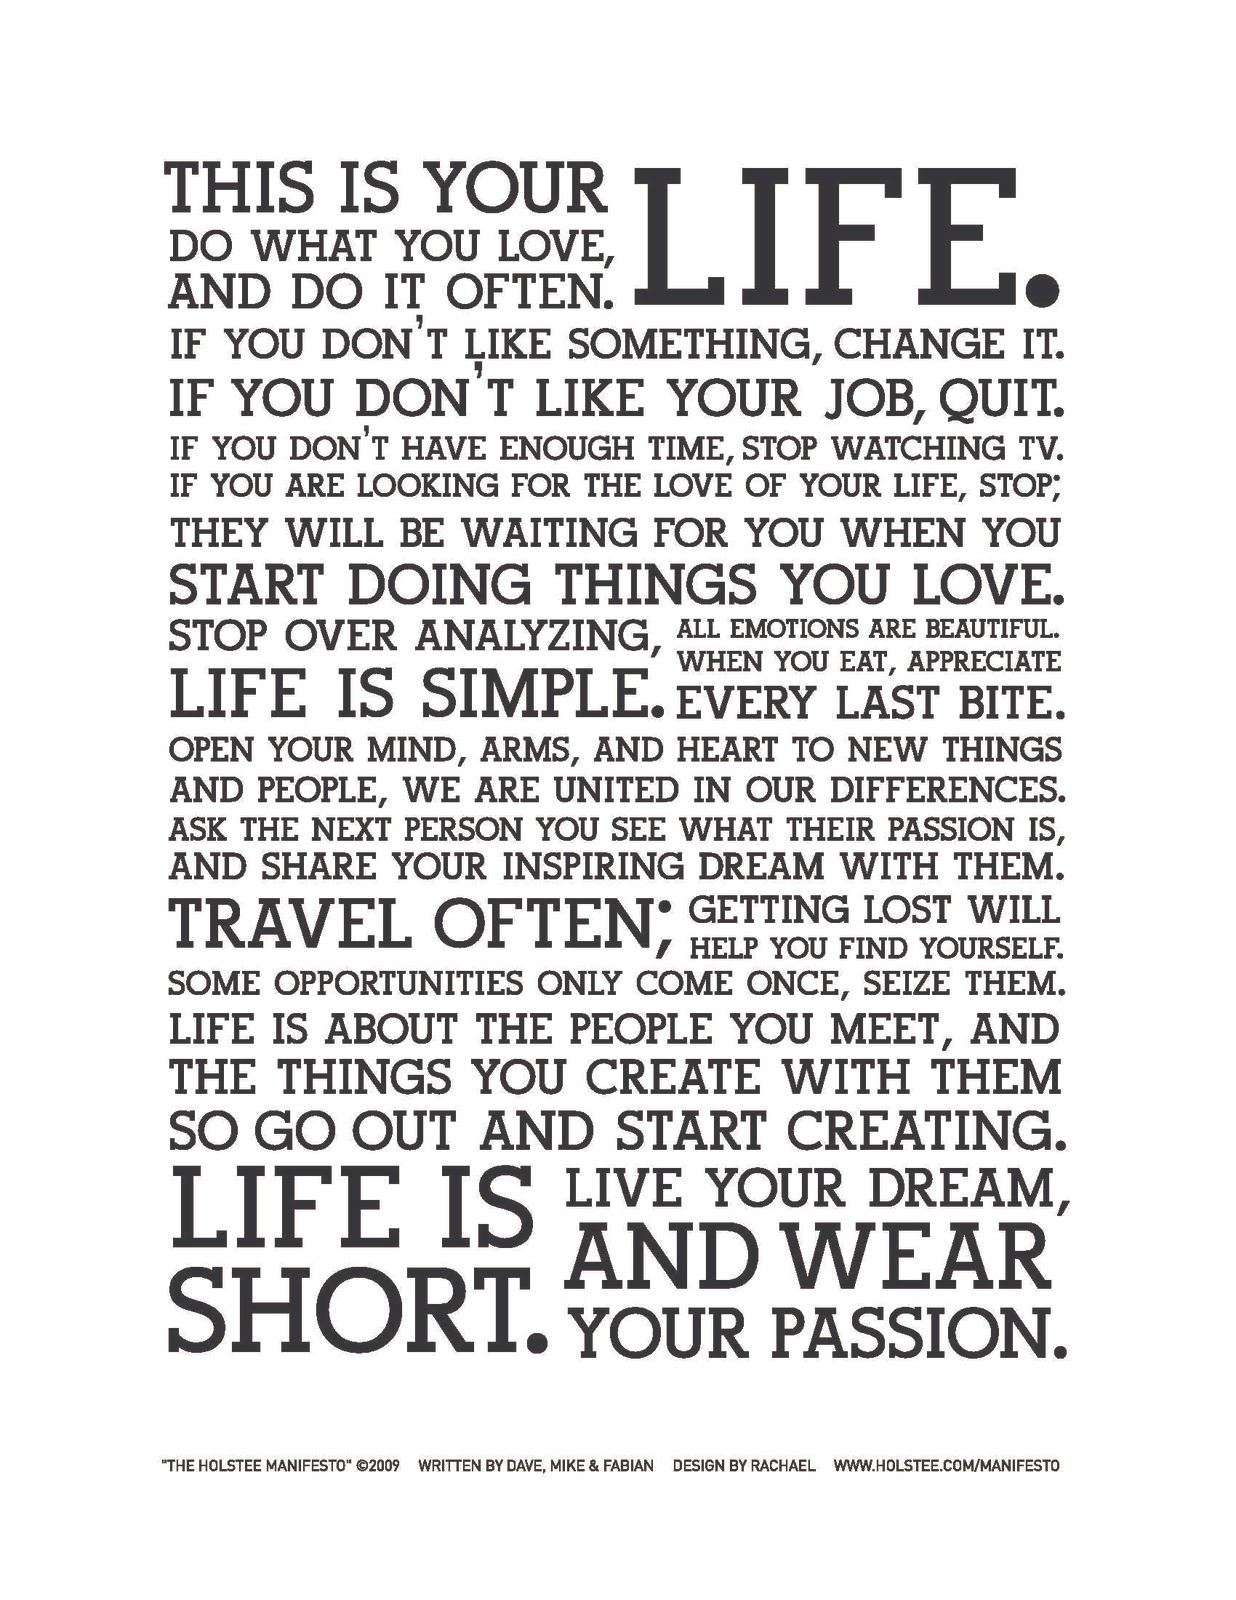 This is your life.
Do what you love, and do it often.
If you don't like something, change it.
If you don't like your job, quit.
If you don't have enough time, stop watching TV.
If you are looking for the love of your life, stop; they will be waiting for you when you when you start doing things you love.
Stop over analyzing, life is simple.
All emotions are beautiful.
When you eat, appreciate every last bite.
Open your mind, arms, and heart to new things and people, we are united in our differences.
Ask the next person you see what their passion is, and share your inspiring dream with them.
Travel often; getting lost will help you find yourself.
Some opportunities only come once, seize them.
Life is about the people you meet, and the things you create with them so go out start creating.
Life is short.
Live your dream and wear your passion.  Wisdom Life Motivational Change The Holstee Manifesto Quote ~ Dave Radparvar ~ Fabian Pfortmüller ~ Michael Radparvar